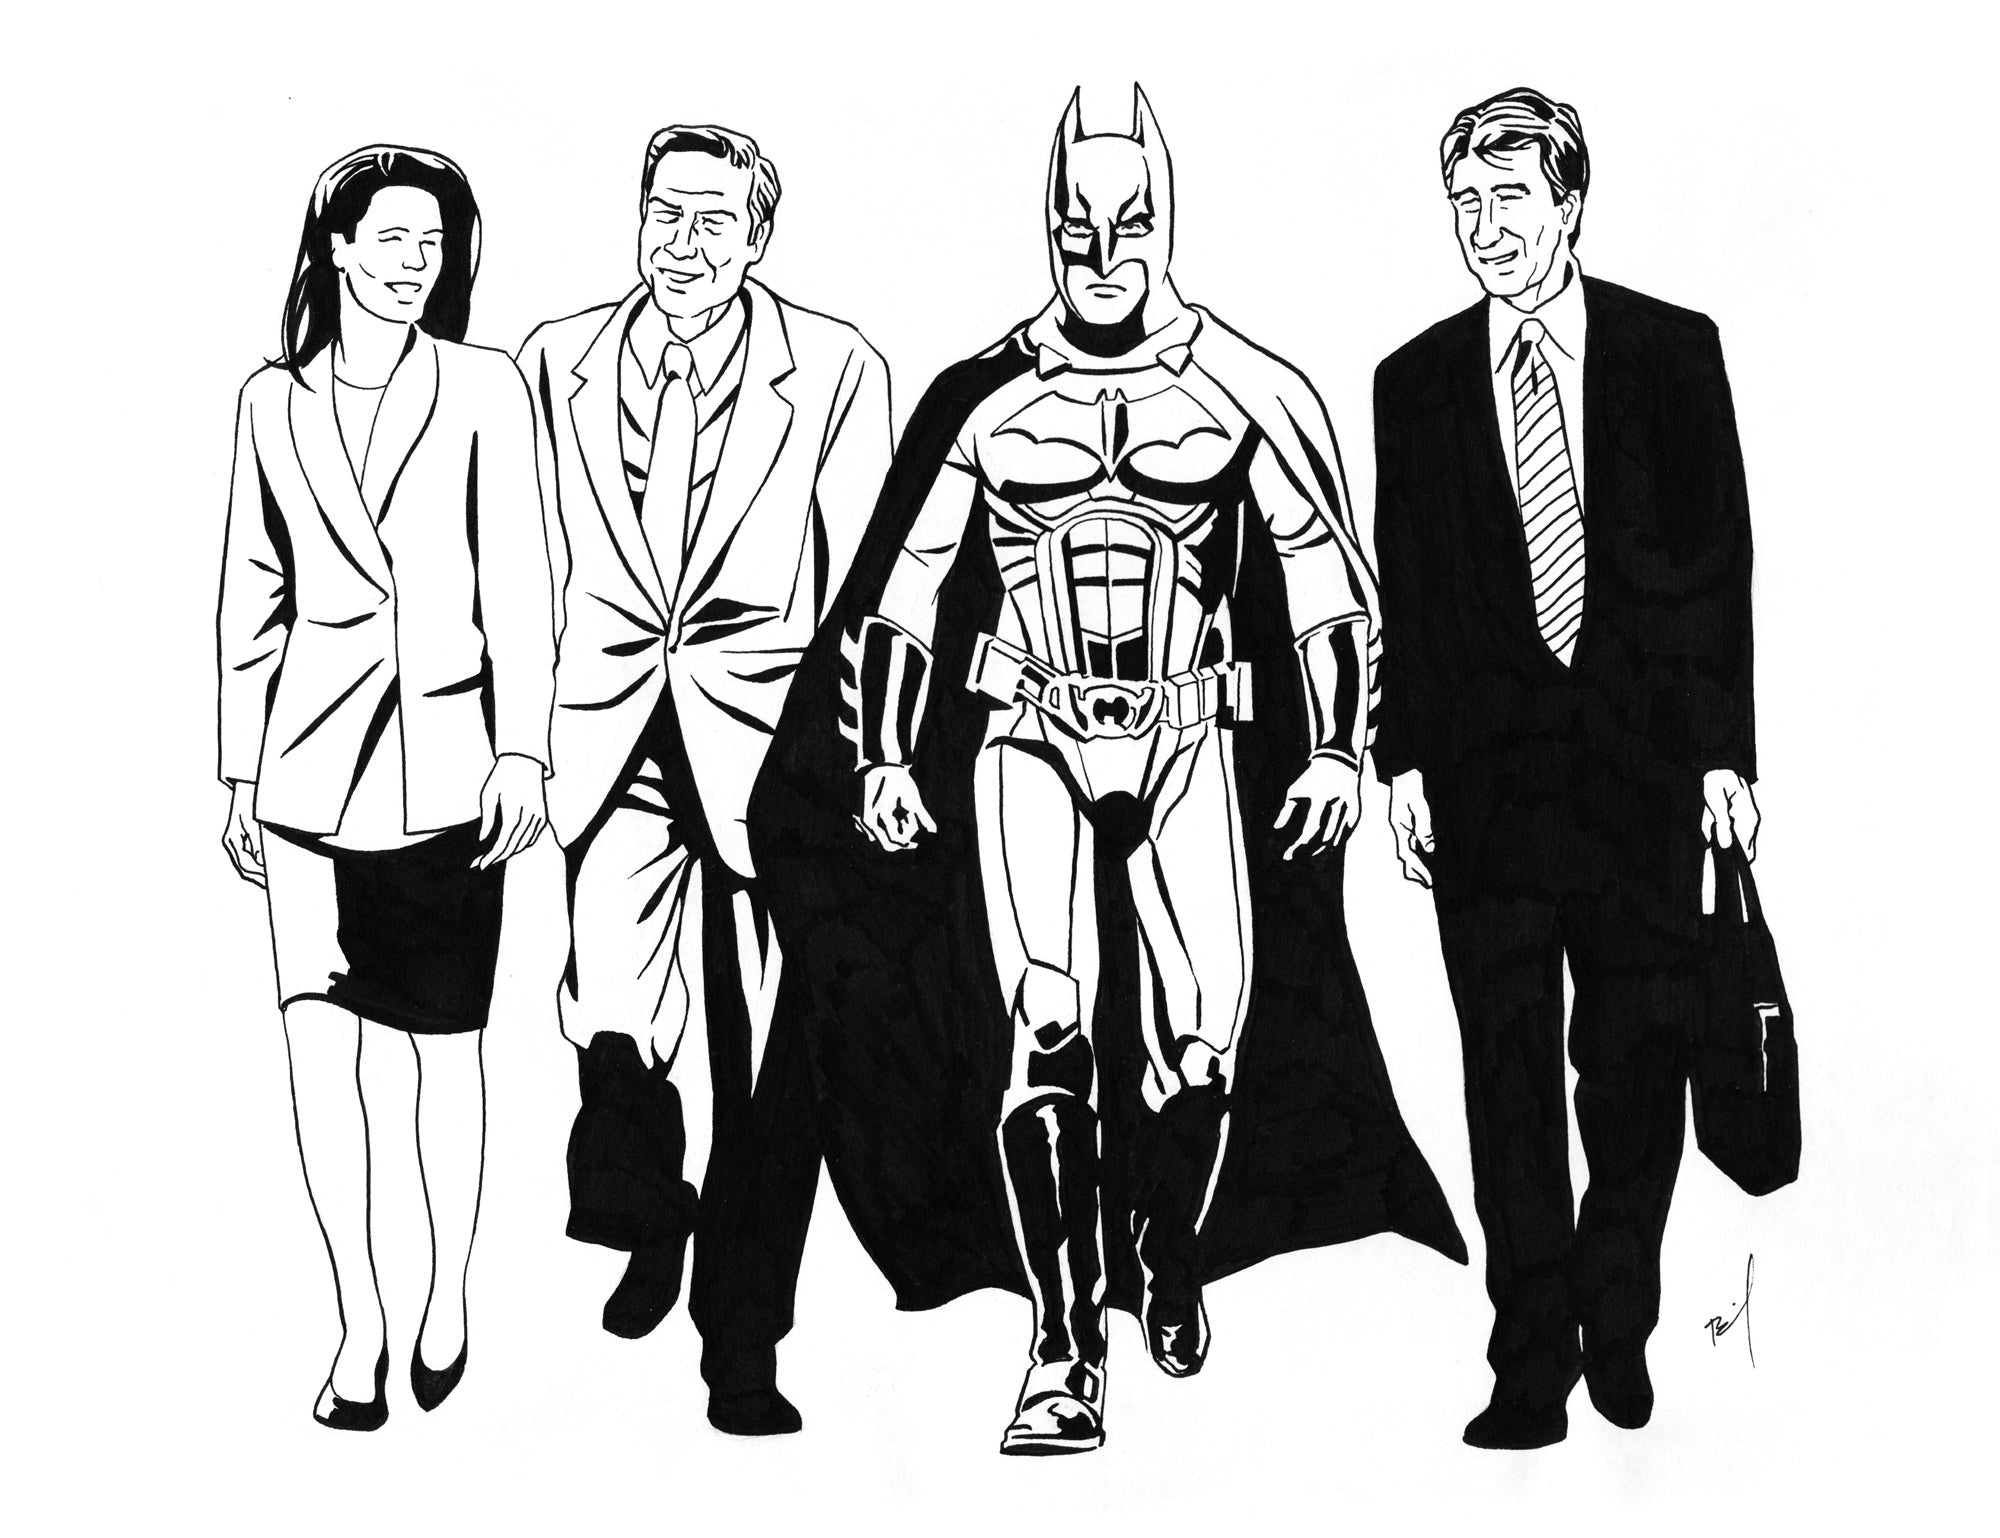 proto-"Crimefighters" ink drawing